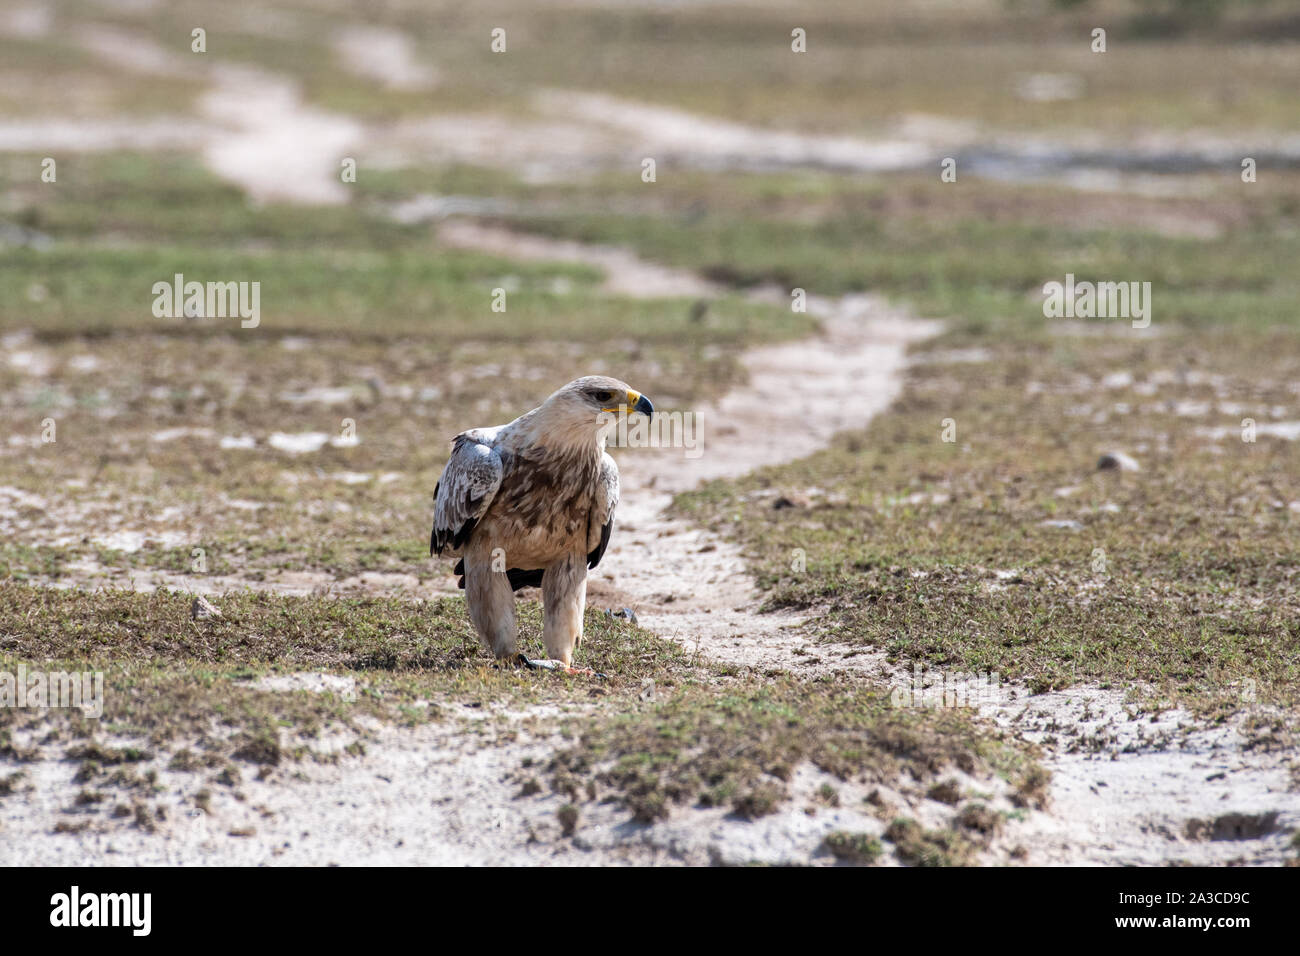 Tawny eagle or Aquila rapax with a Spiny tailed lizard or Uromastyx kill in his claws in an open field at tal chhapar blackbuck sanctuary, india Stock Photo